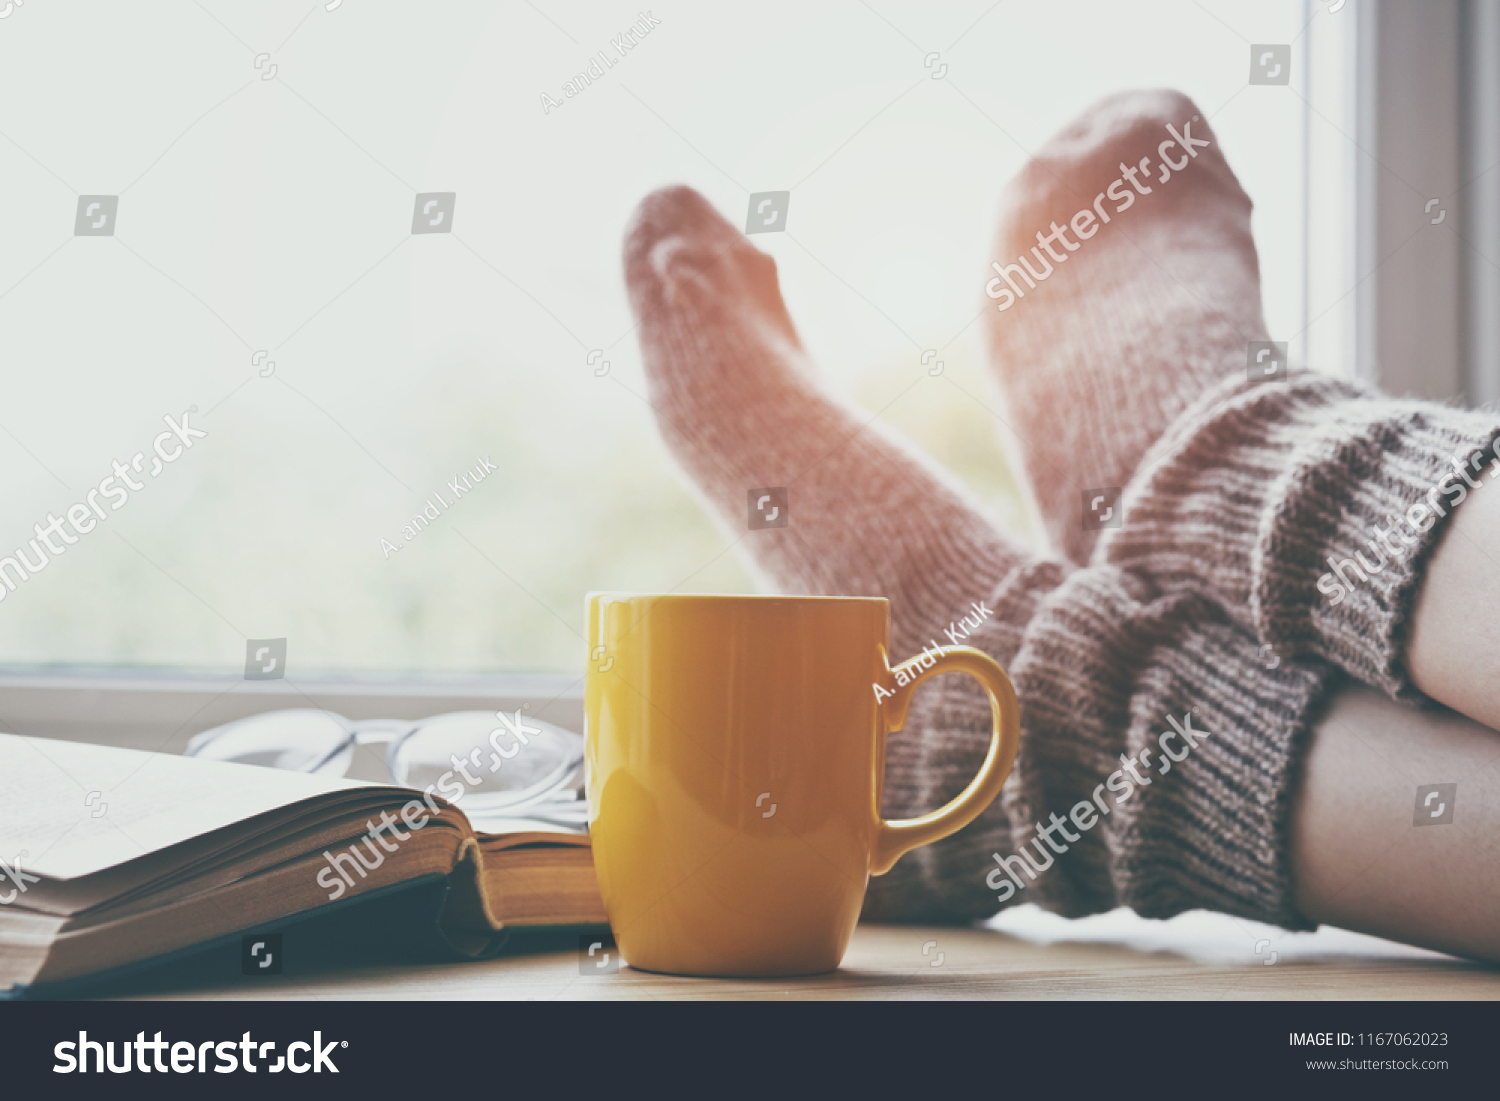 Woman resting keeping legs in warm socks on table with morning coffee and reading book #1167062023